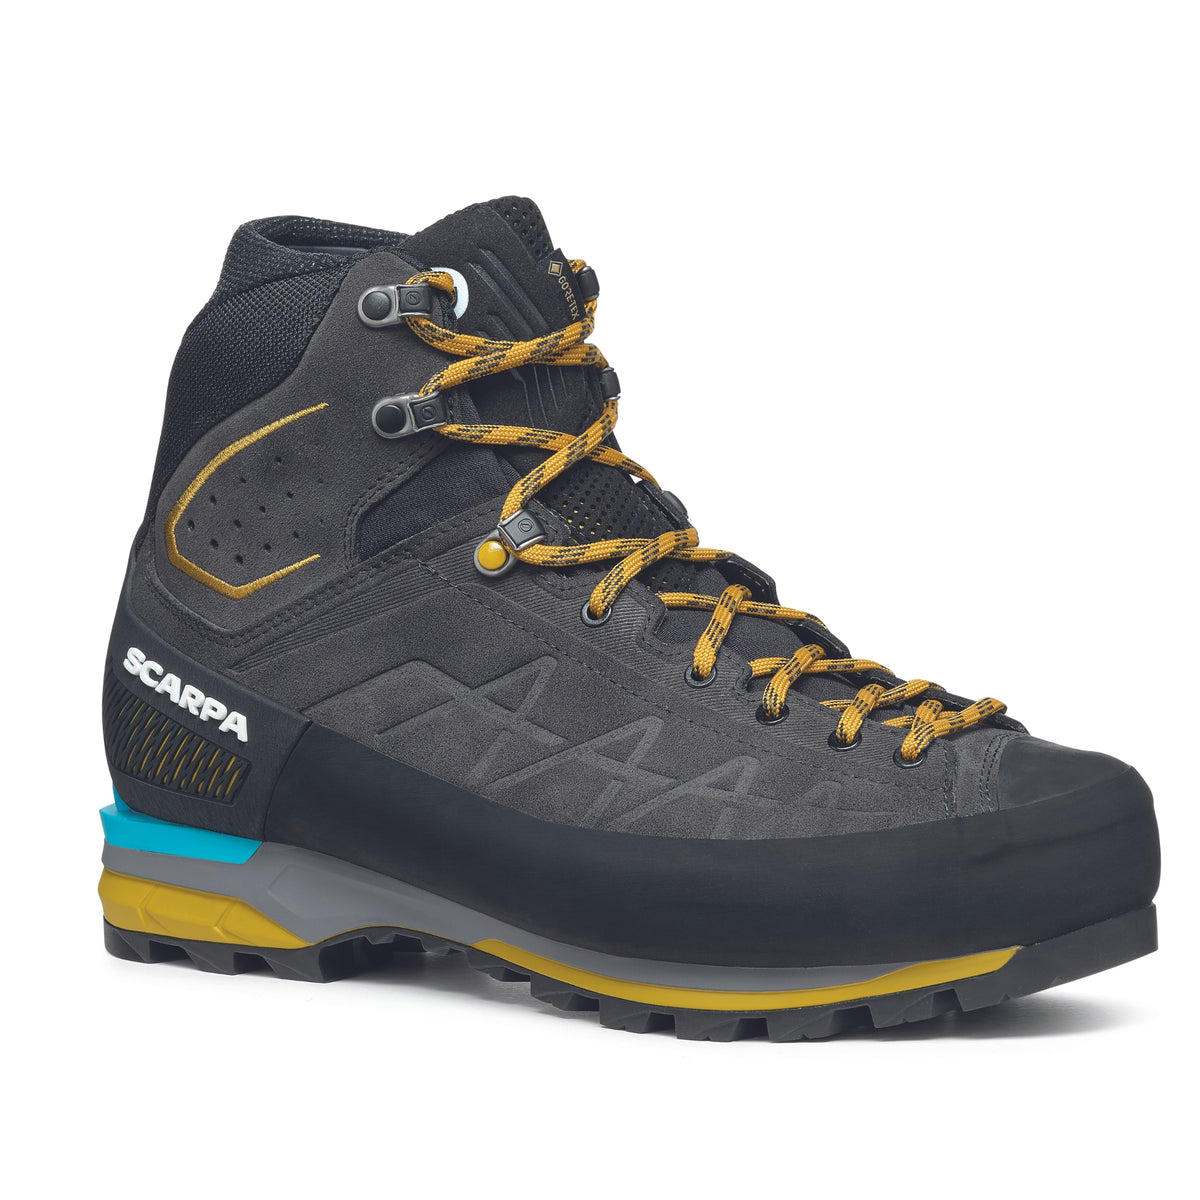 Scarpa Zodiac Tech GTX mens boots in anthracite sulphur colour. Showing side on view.